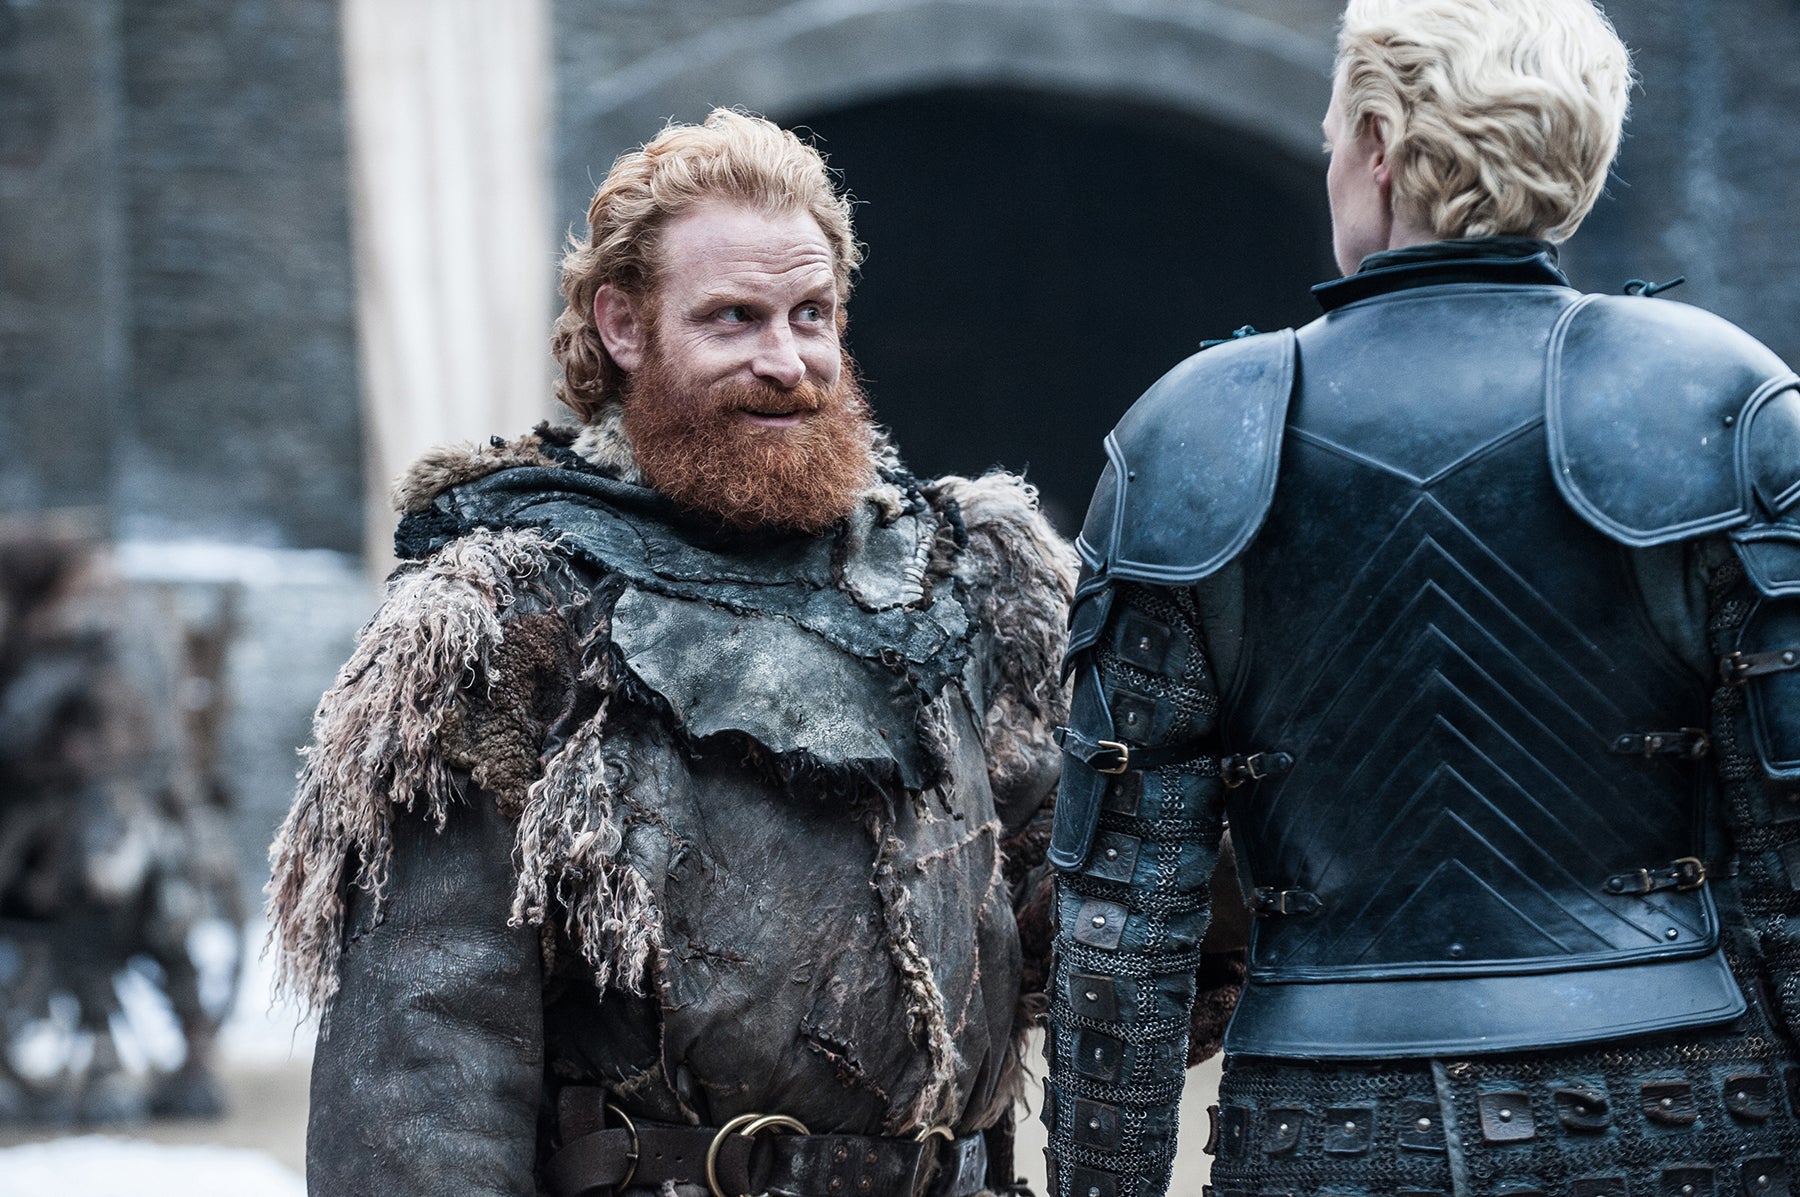 Tormund stands in front of Brienne of Tarth in the courtyard of Winterfell.